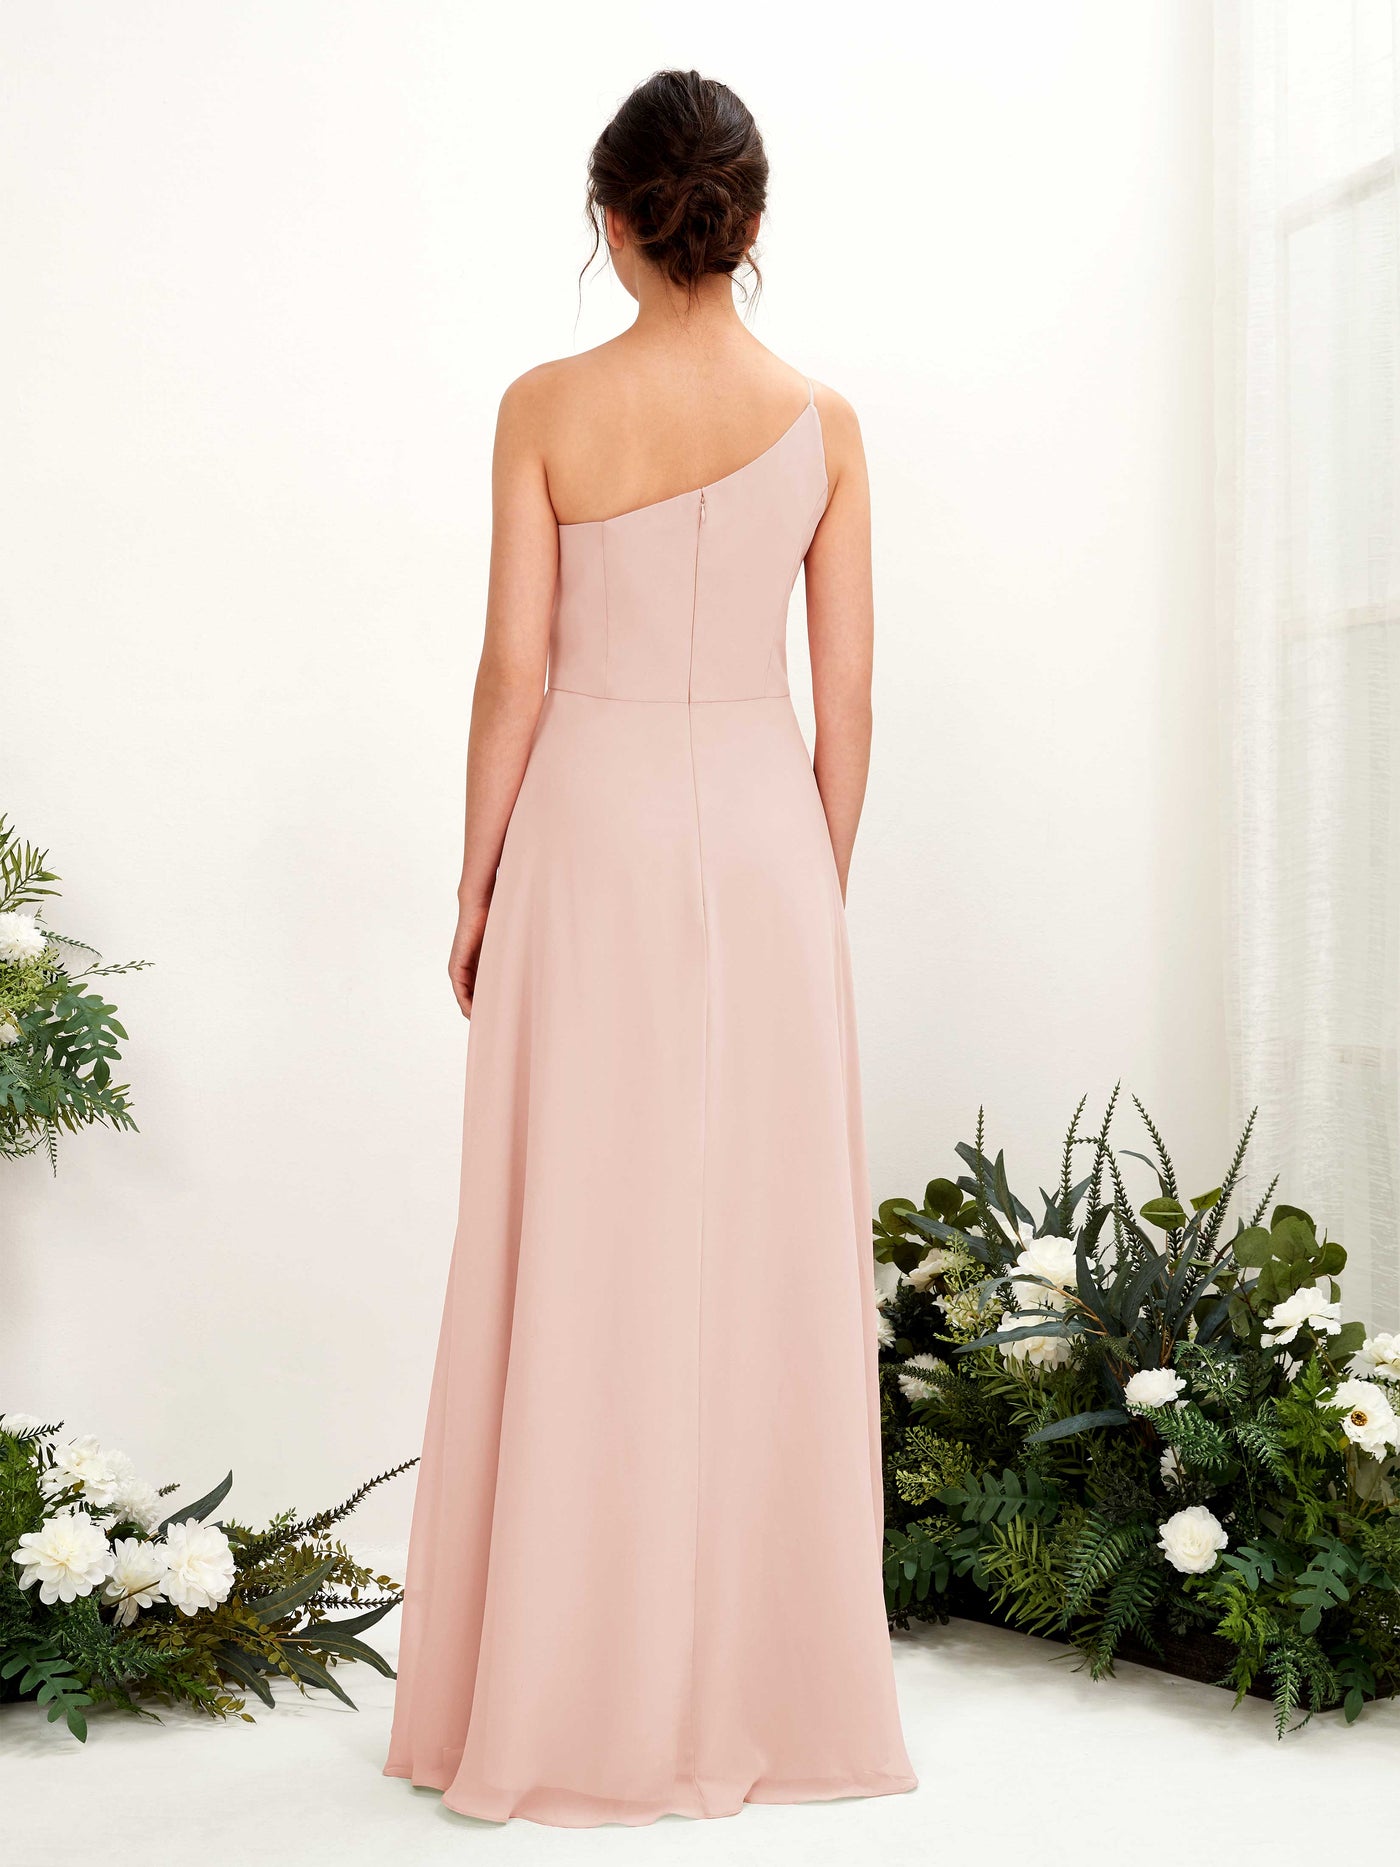 Pearl Pink Bridesmaid Dresses Bridesmaid Dress A-line Chiffon One Shoulder Full Length Sleeveless Wedding Party Dress (81225708)#color_pearl-pink